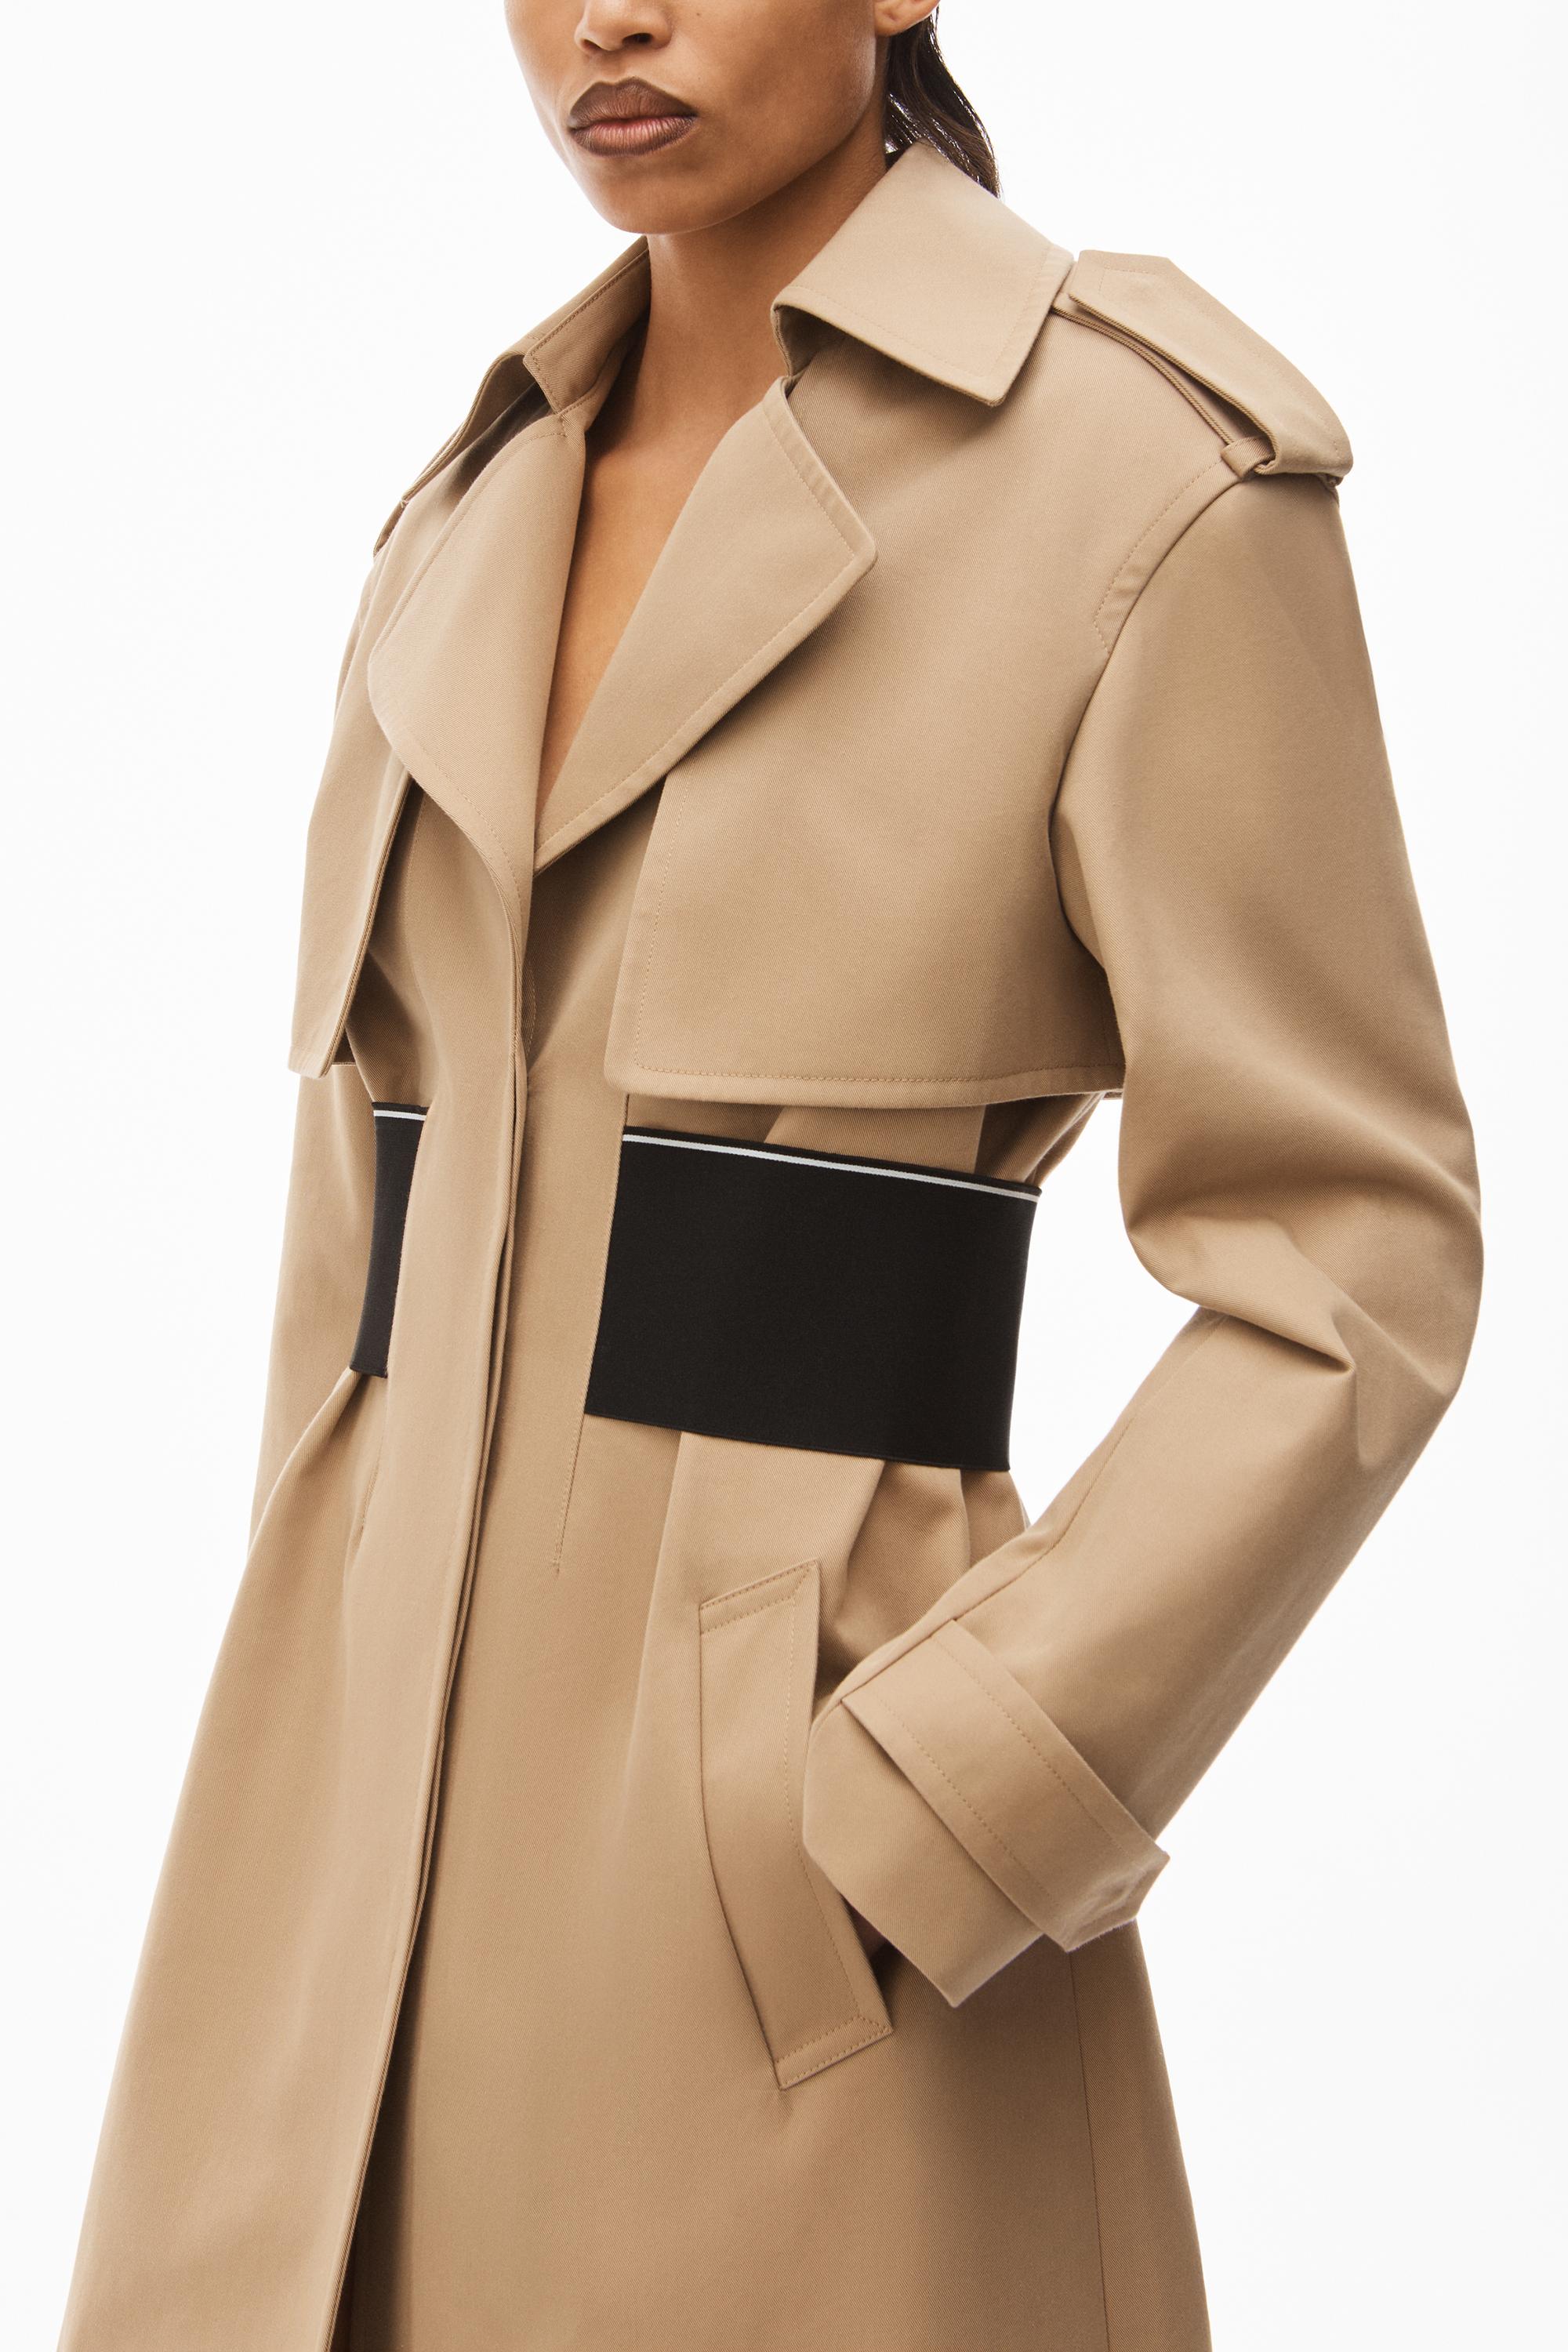 assimilation blast sø Alexander Wang Logo Trench Coat In Cotton Tailoring in Natural | Lyst